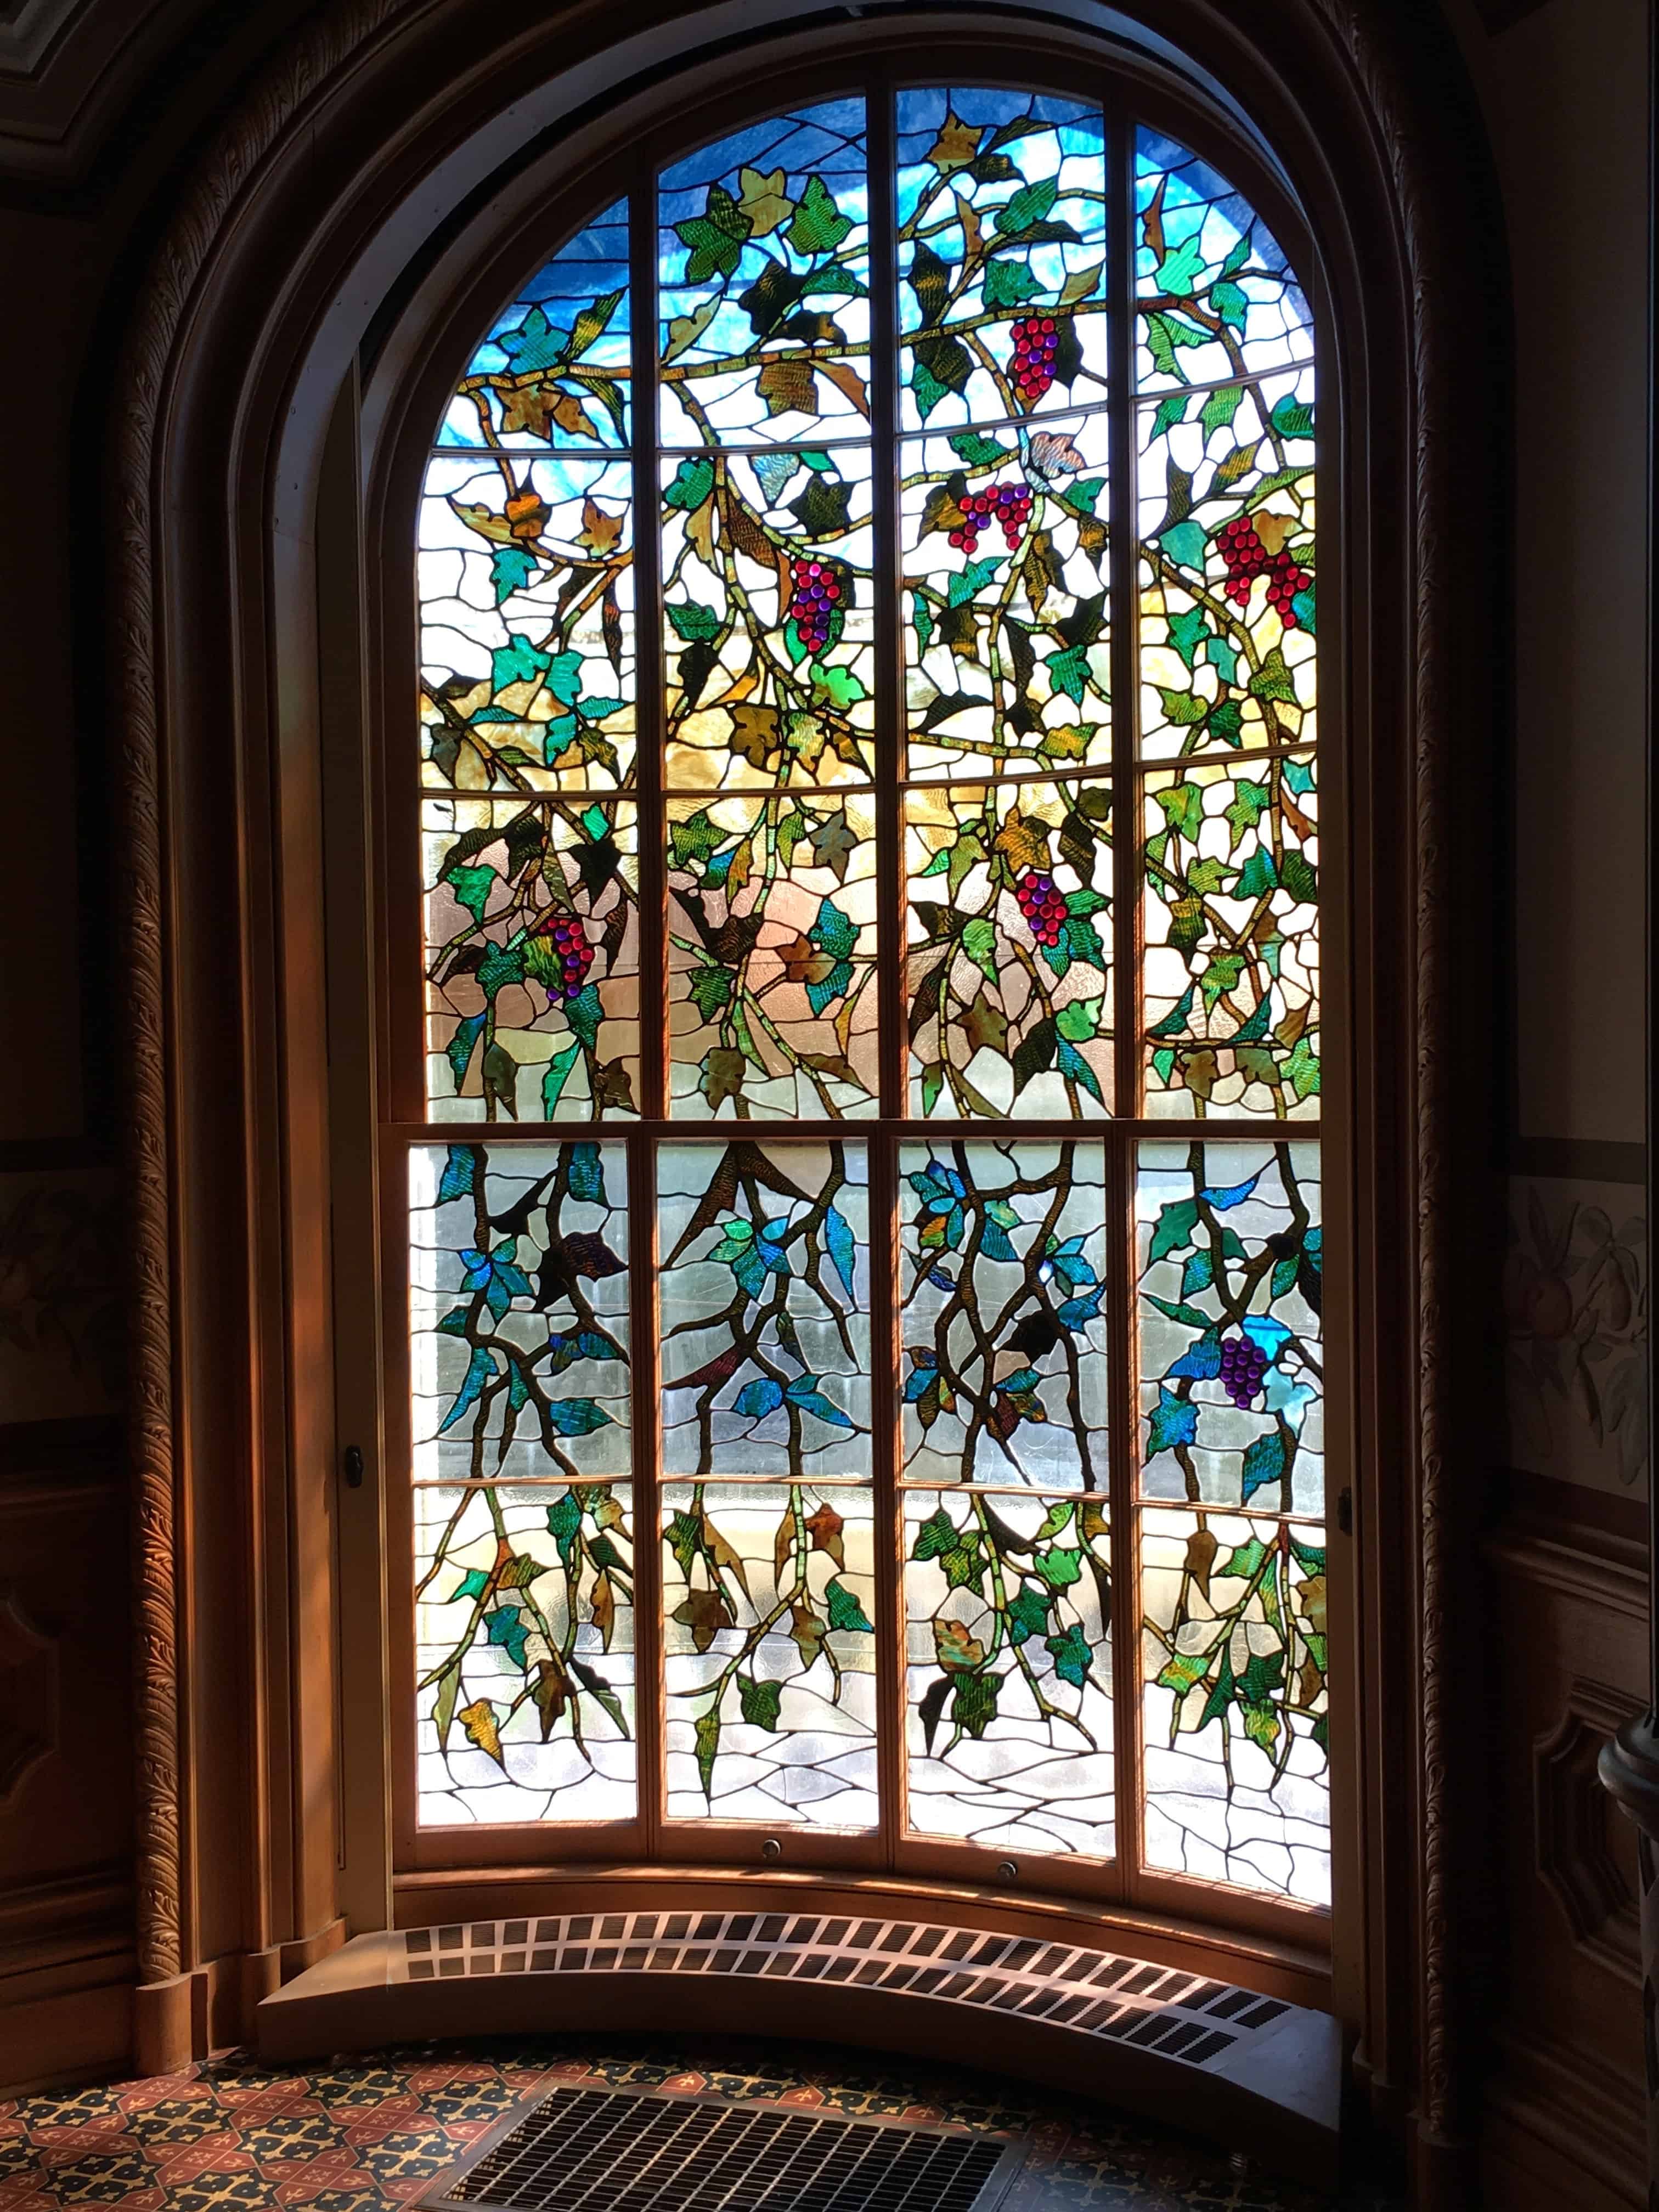 Stained glass window in the Hay House in Macon, Georgia